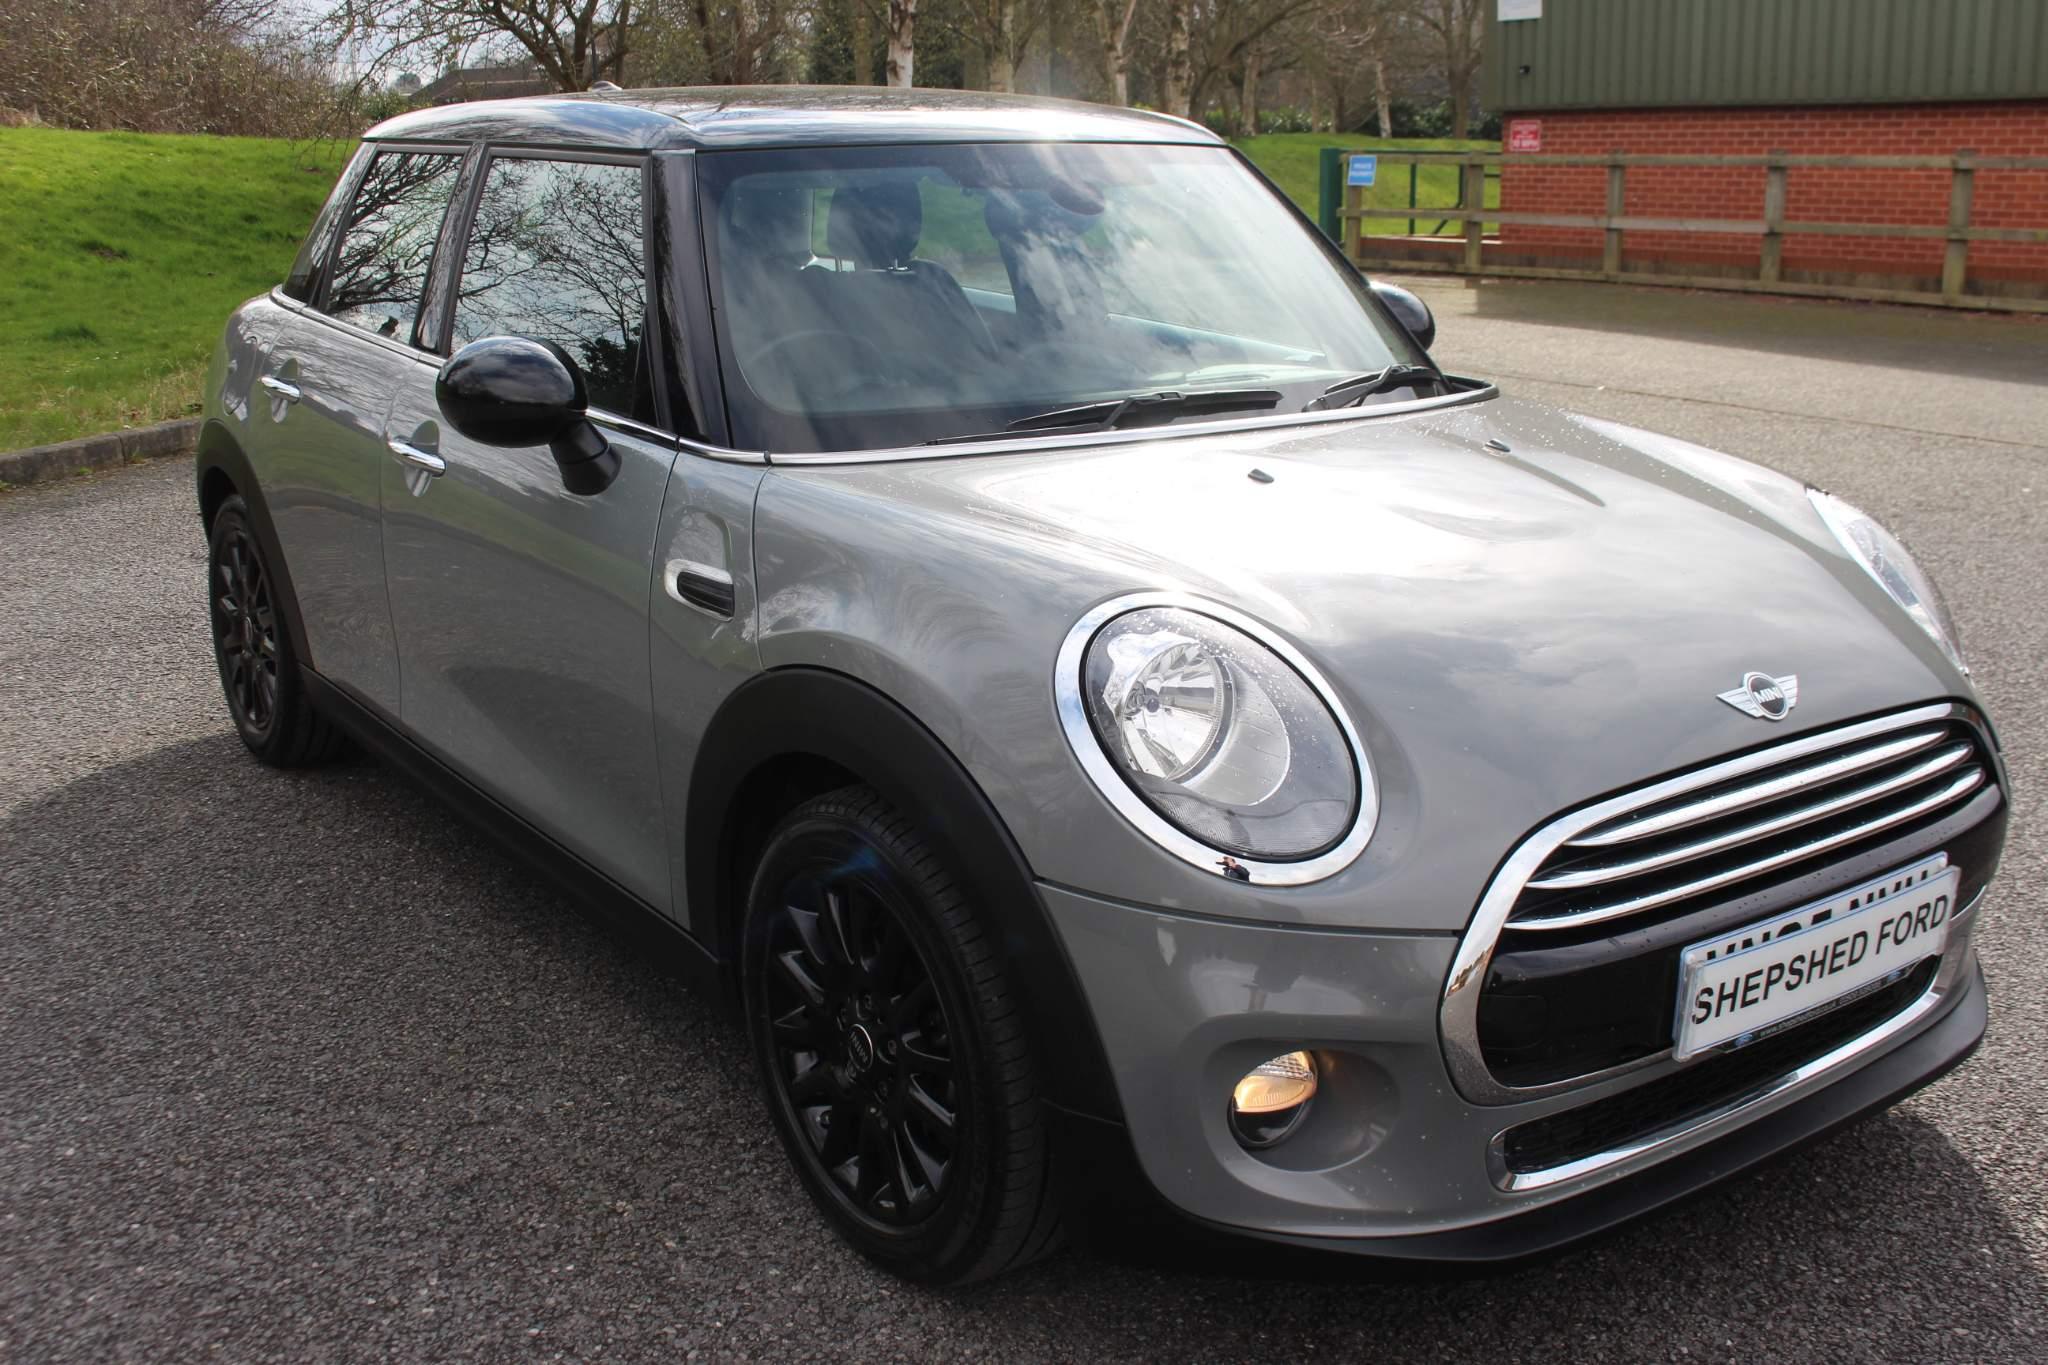 Shepshed Ford | Models Currently Stocked | FORD | RENAULT | MINI ...